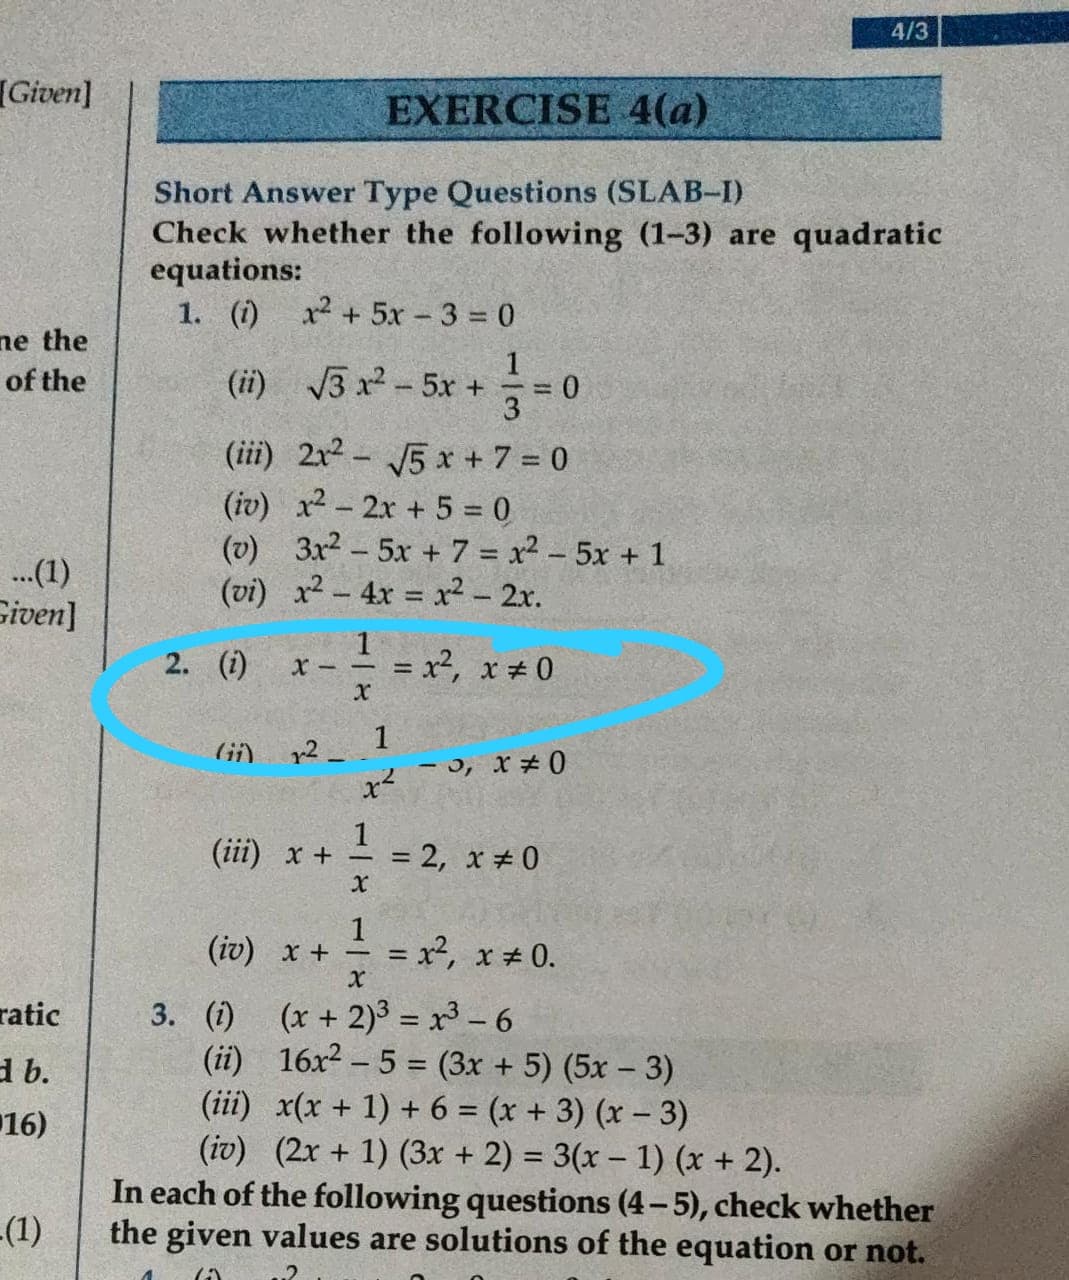 4/3
Given]
EXERCISE 4(a)
Short Answer Type Questions (SLAB-I)
Check whether the following (1-3) are quadratic
equations:
1. (1)
x2 + 5x 3 = 0
ne the
of the
(ii) 3 x2-5r +
= 0
3
(iii) 2x2 - J5 x + 7 = 0
(iv) x2-2x + 5 = 0
(v) 3x2-5x + 7 = x2 - 5x +1
(vi) x2-4x = x² - 2x.
.(1)
Given]
2. (i)
= x², x # 0
1
r2
0# x 'c -
(ii) х +
= 2, x # 0
%3D
1
+ x (21)
= x,
(x + 2)3 = x- 6
(ii) 16x2 - 5 = (3x + 5) (5x - 3)
(iii) x(x + 1) + 6 = (x + 3) (x – 3)
(iv) (2x + 1) (3x + 2) = 3(x – 1) (x + 2).
In each of the following questions (4-5), check whether
the given values are solutions of the equation or not.
x # 0.
%3D
ratic
3. (i)
d b.
16)
-(1)
.2
118
